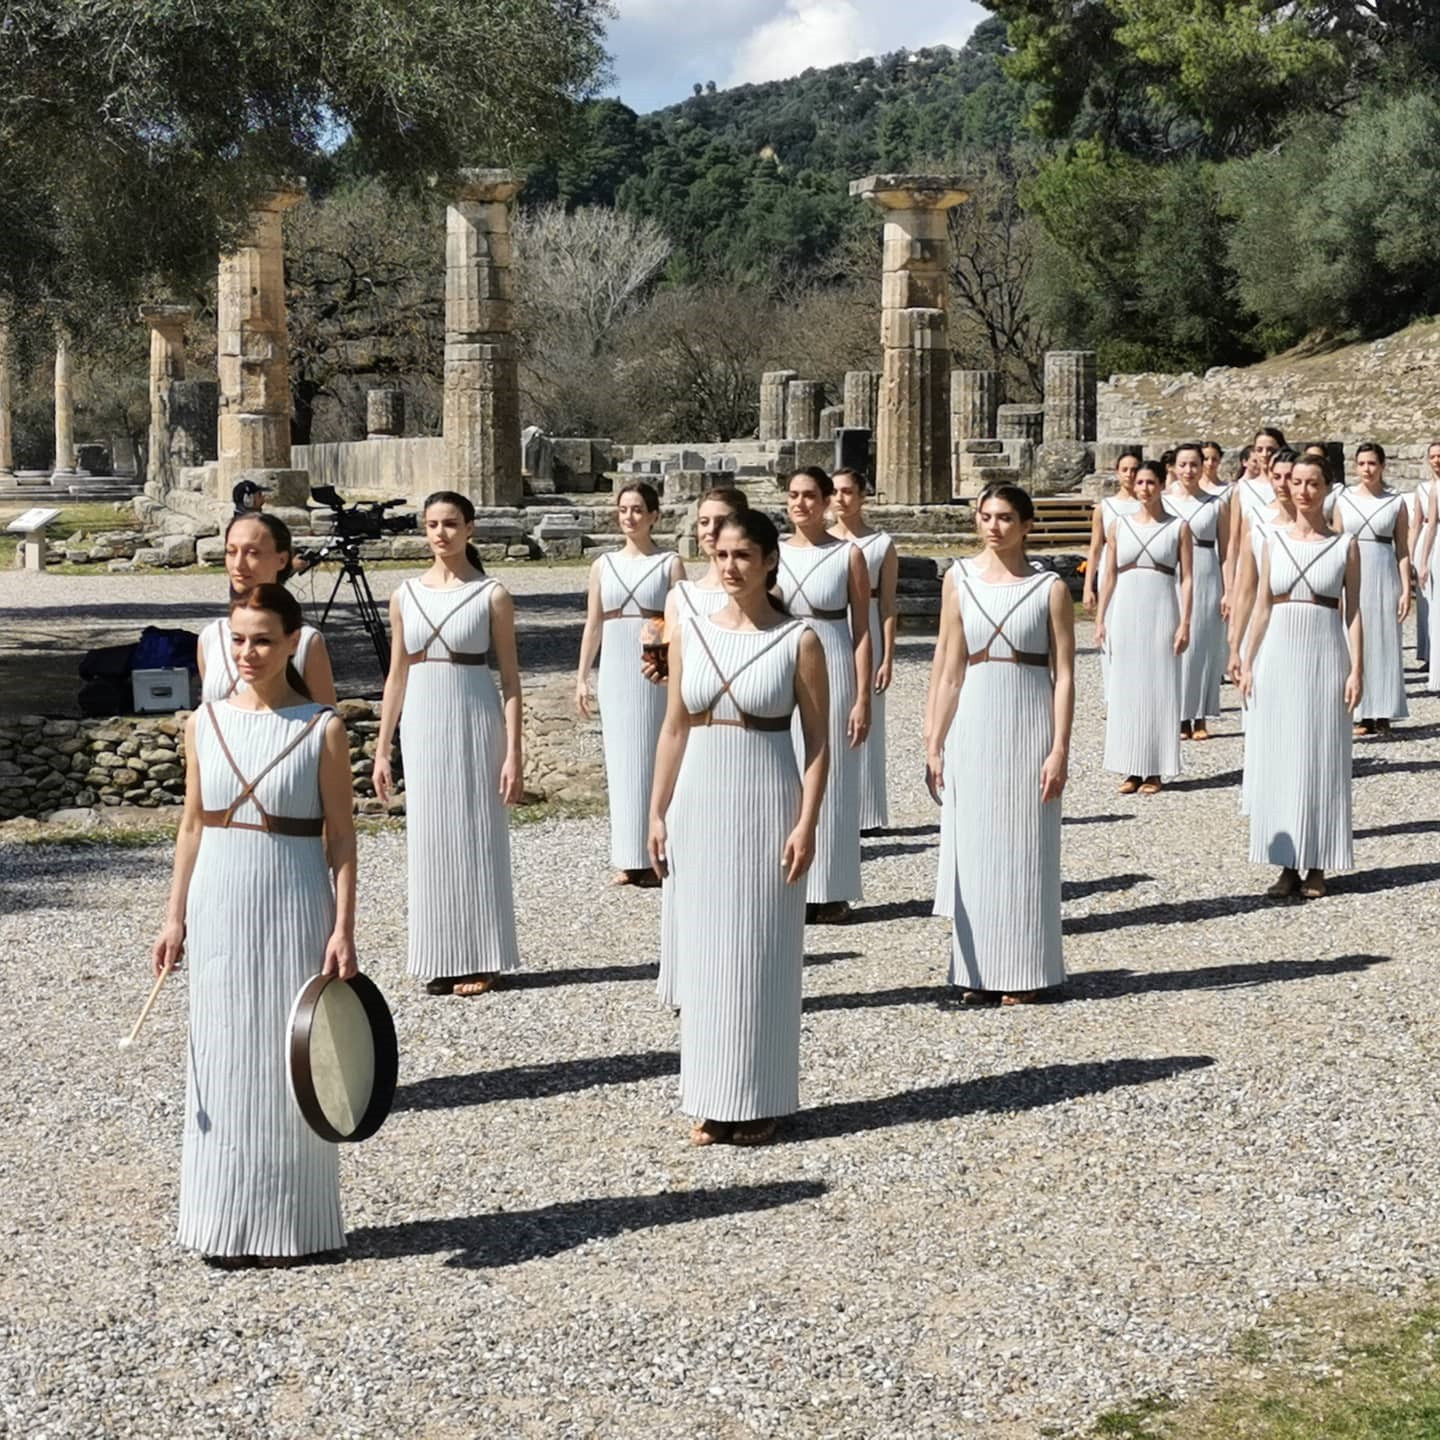 The final dress rehearsal ahead of the Olympic Flame lighting ceremony took place today in Ancient Olympia ©Hellenic Olympic Committee